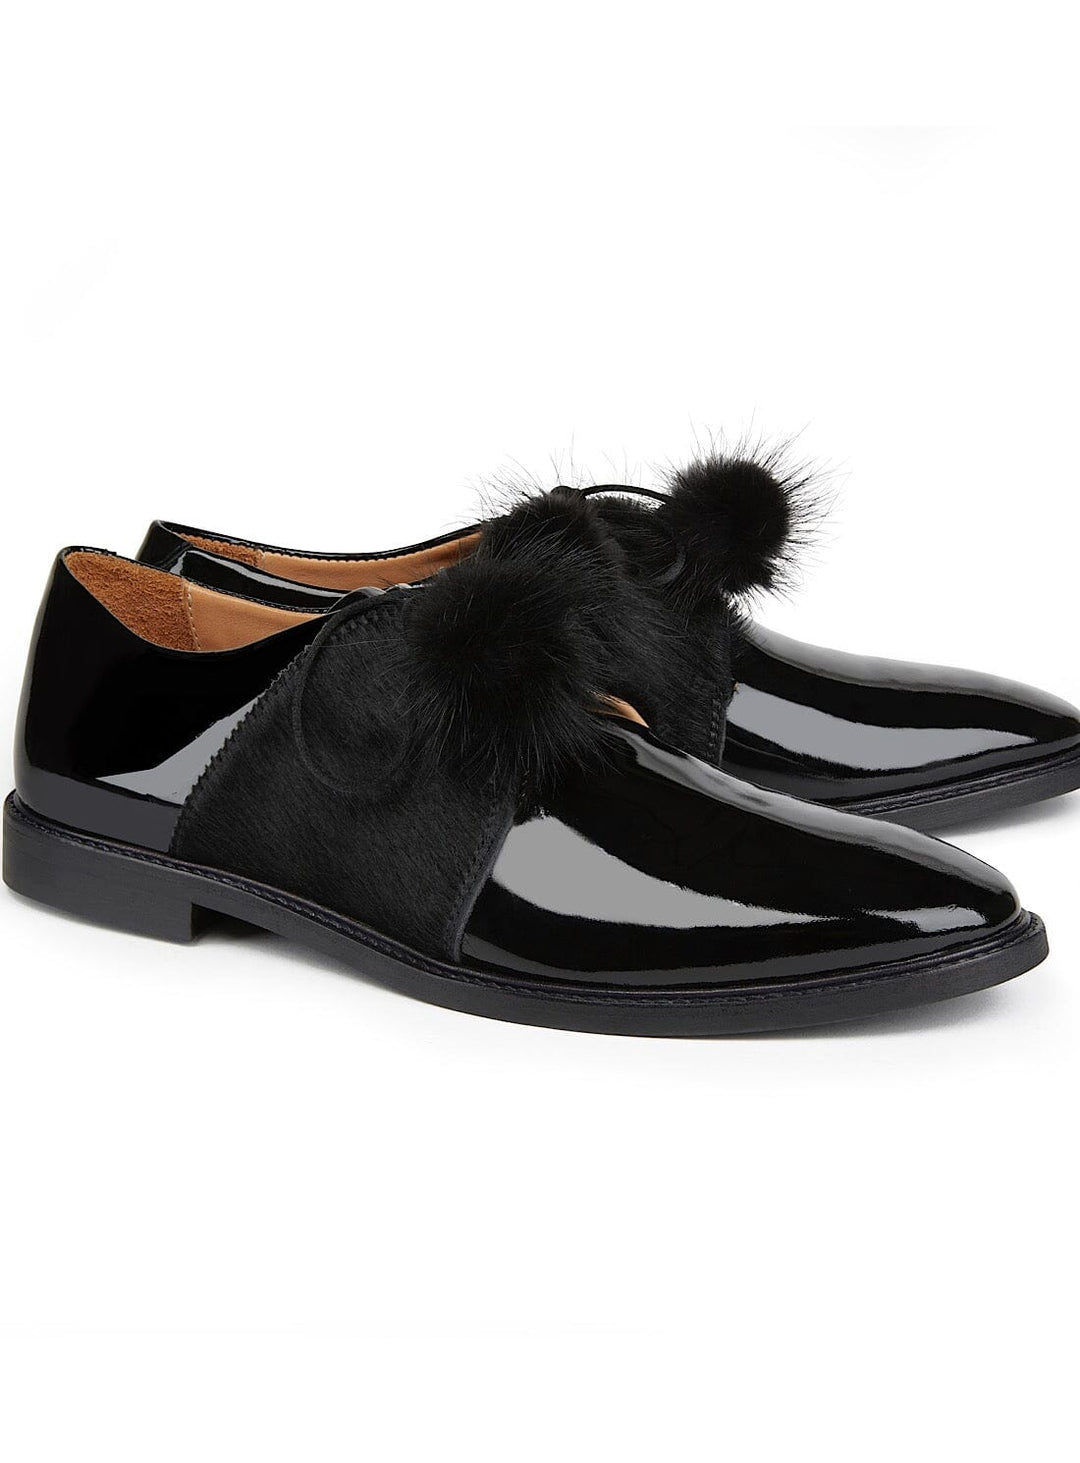 Pomme Noir in Black Patent Shoes YBDFinds 